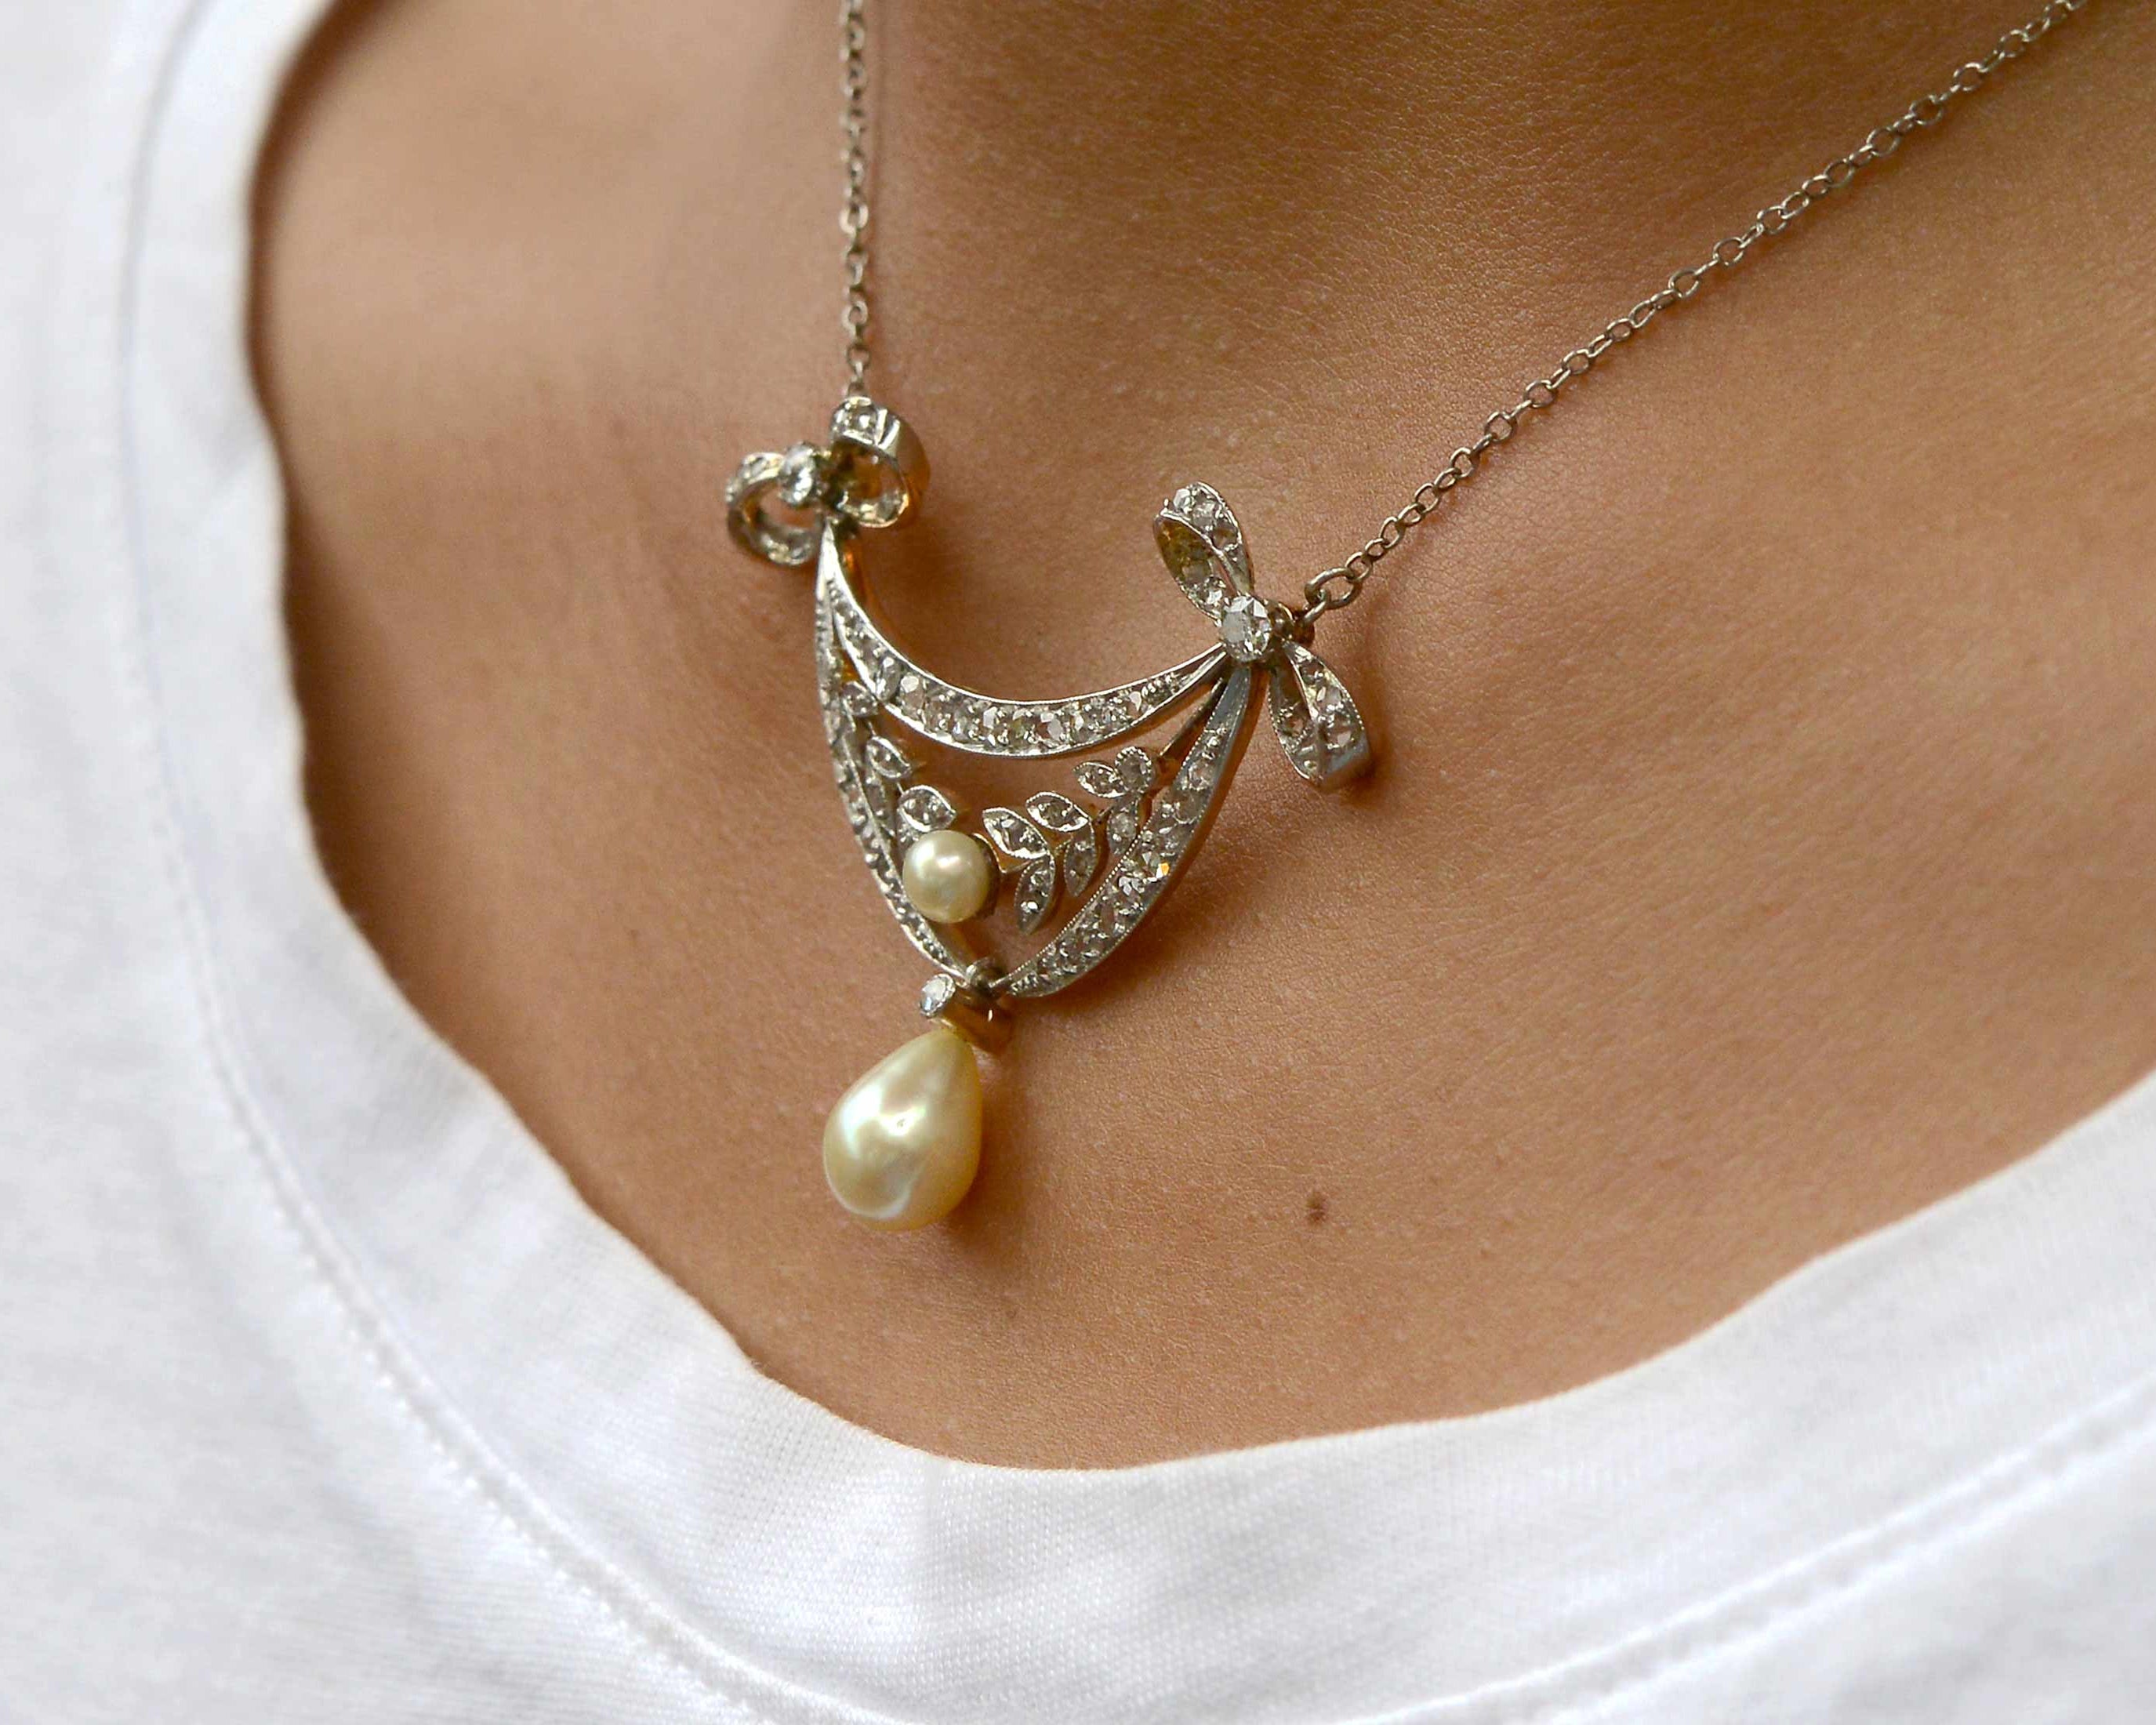 An antique diamonds drop lavalier necklace with two pearls.